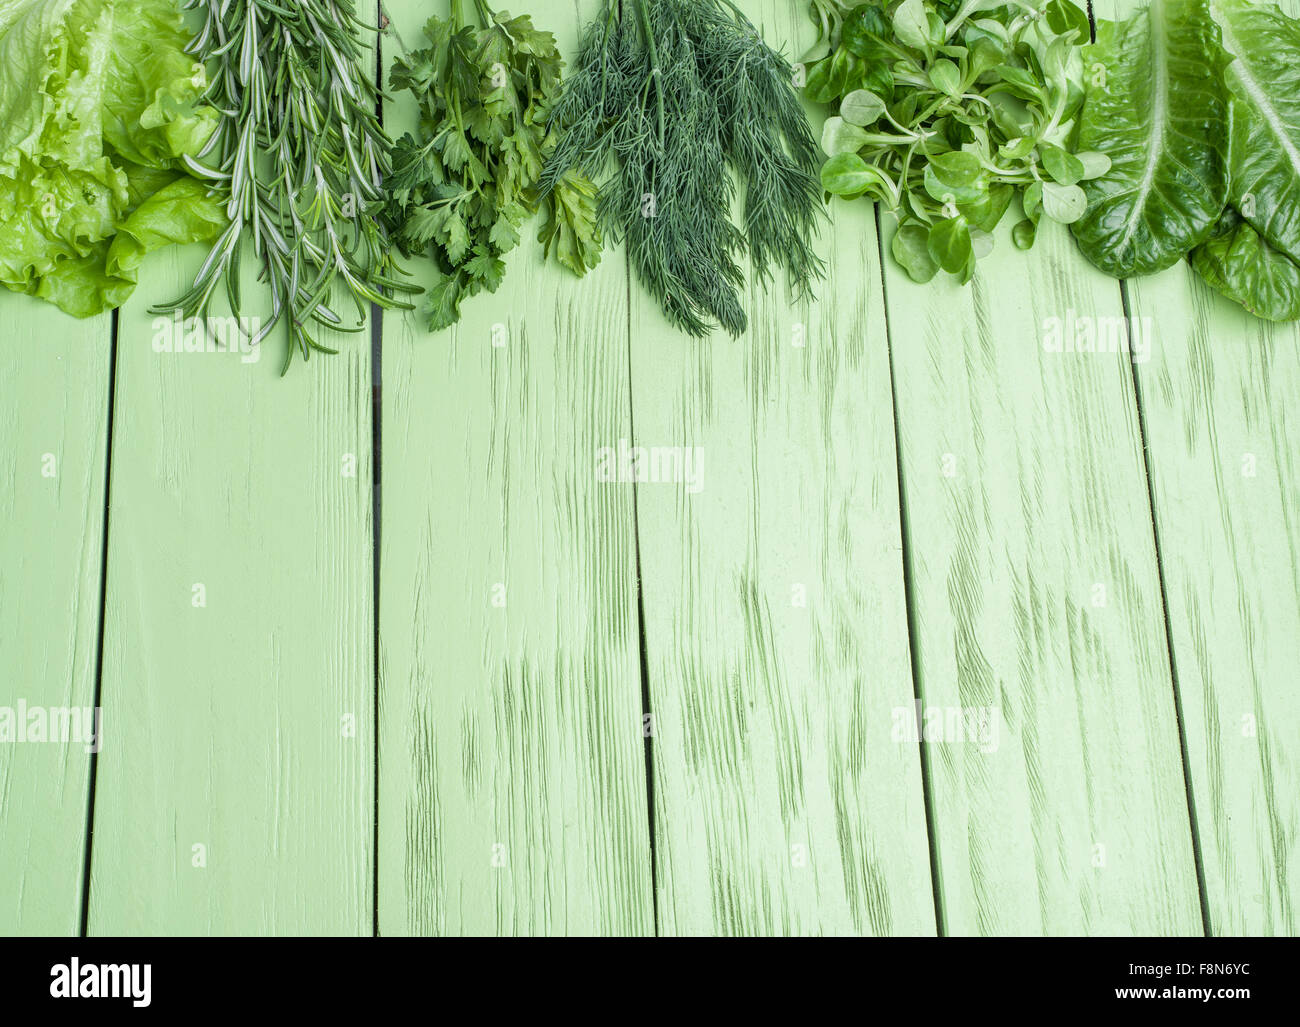 Green herbs on the green wooden background. Stock Photo